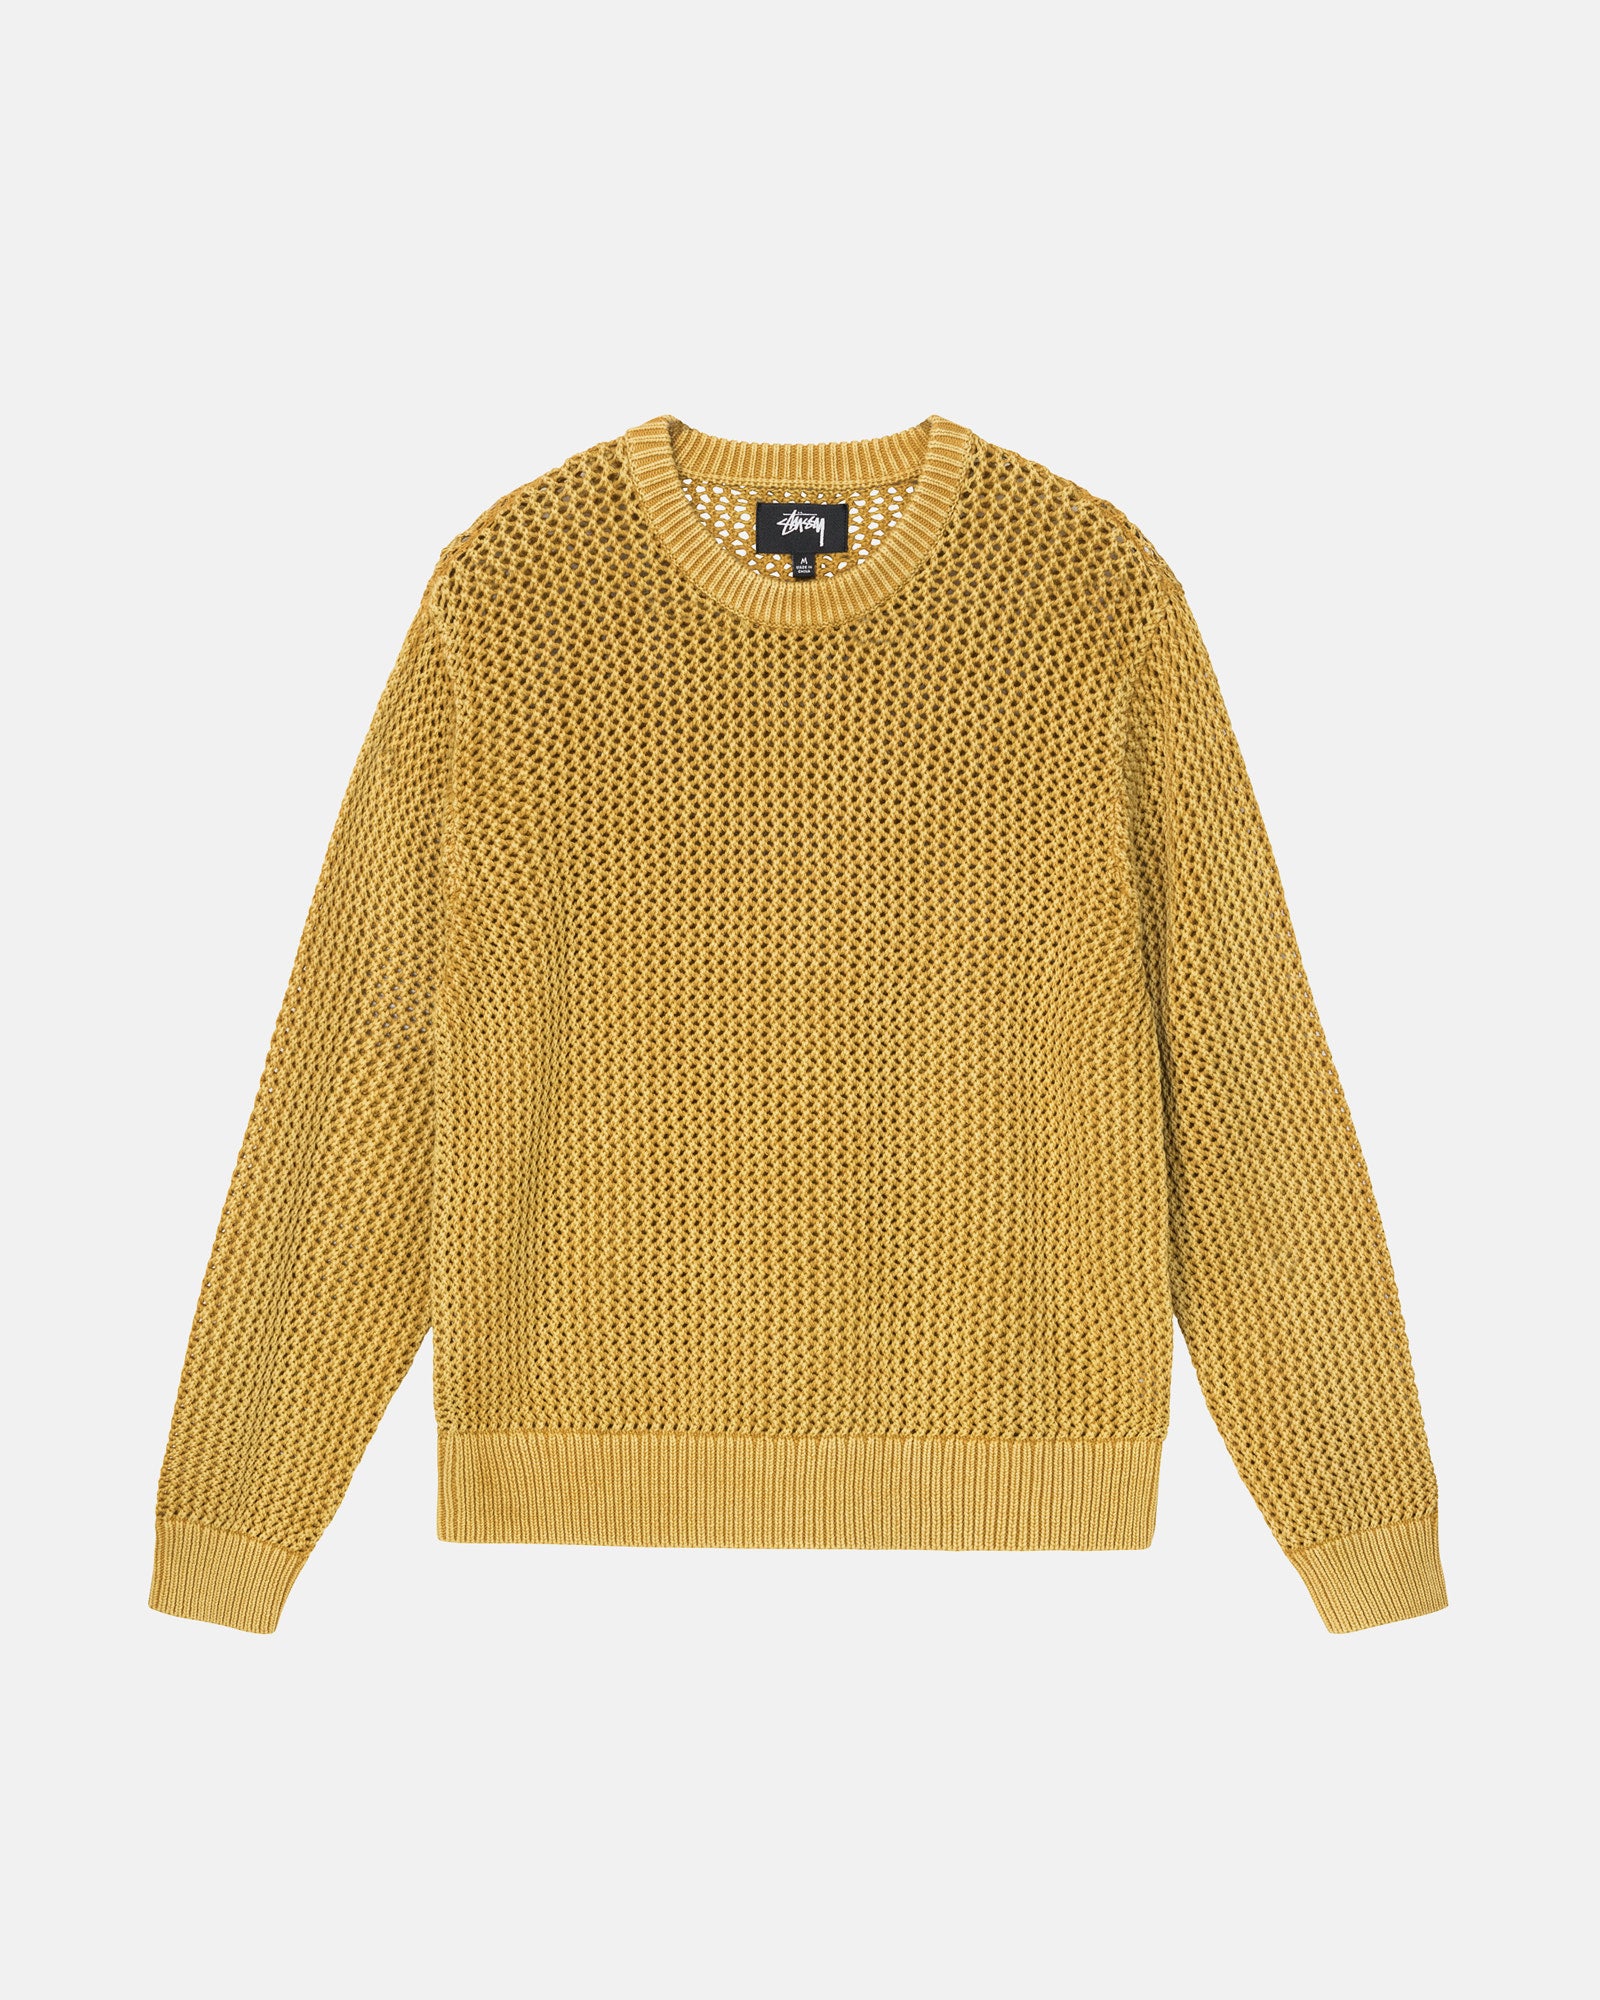 Pigment Dyed Loose Gauge Knit Sweater - Men's Sweaters | Stüssy 